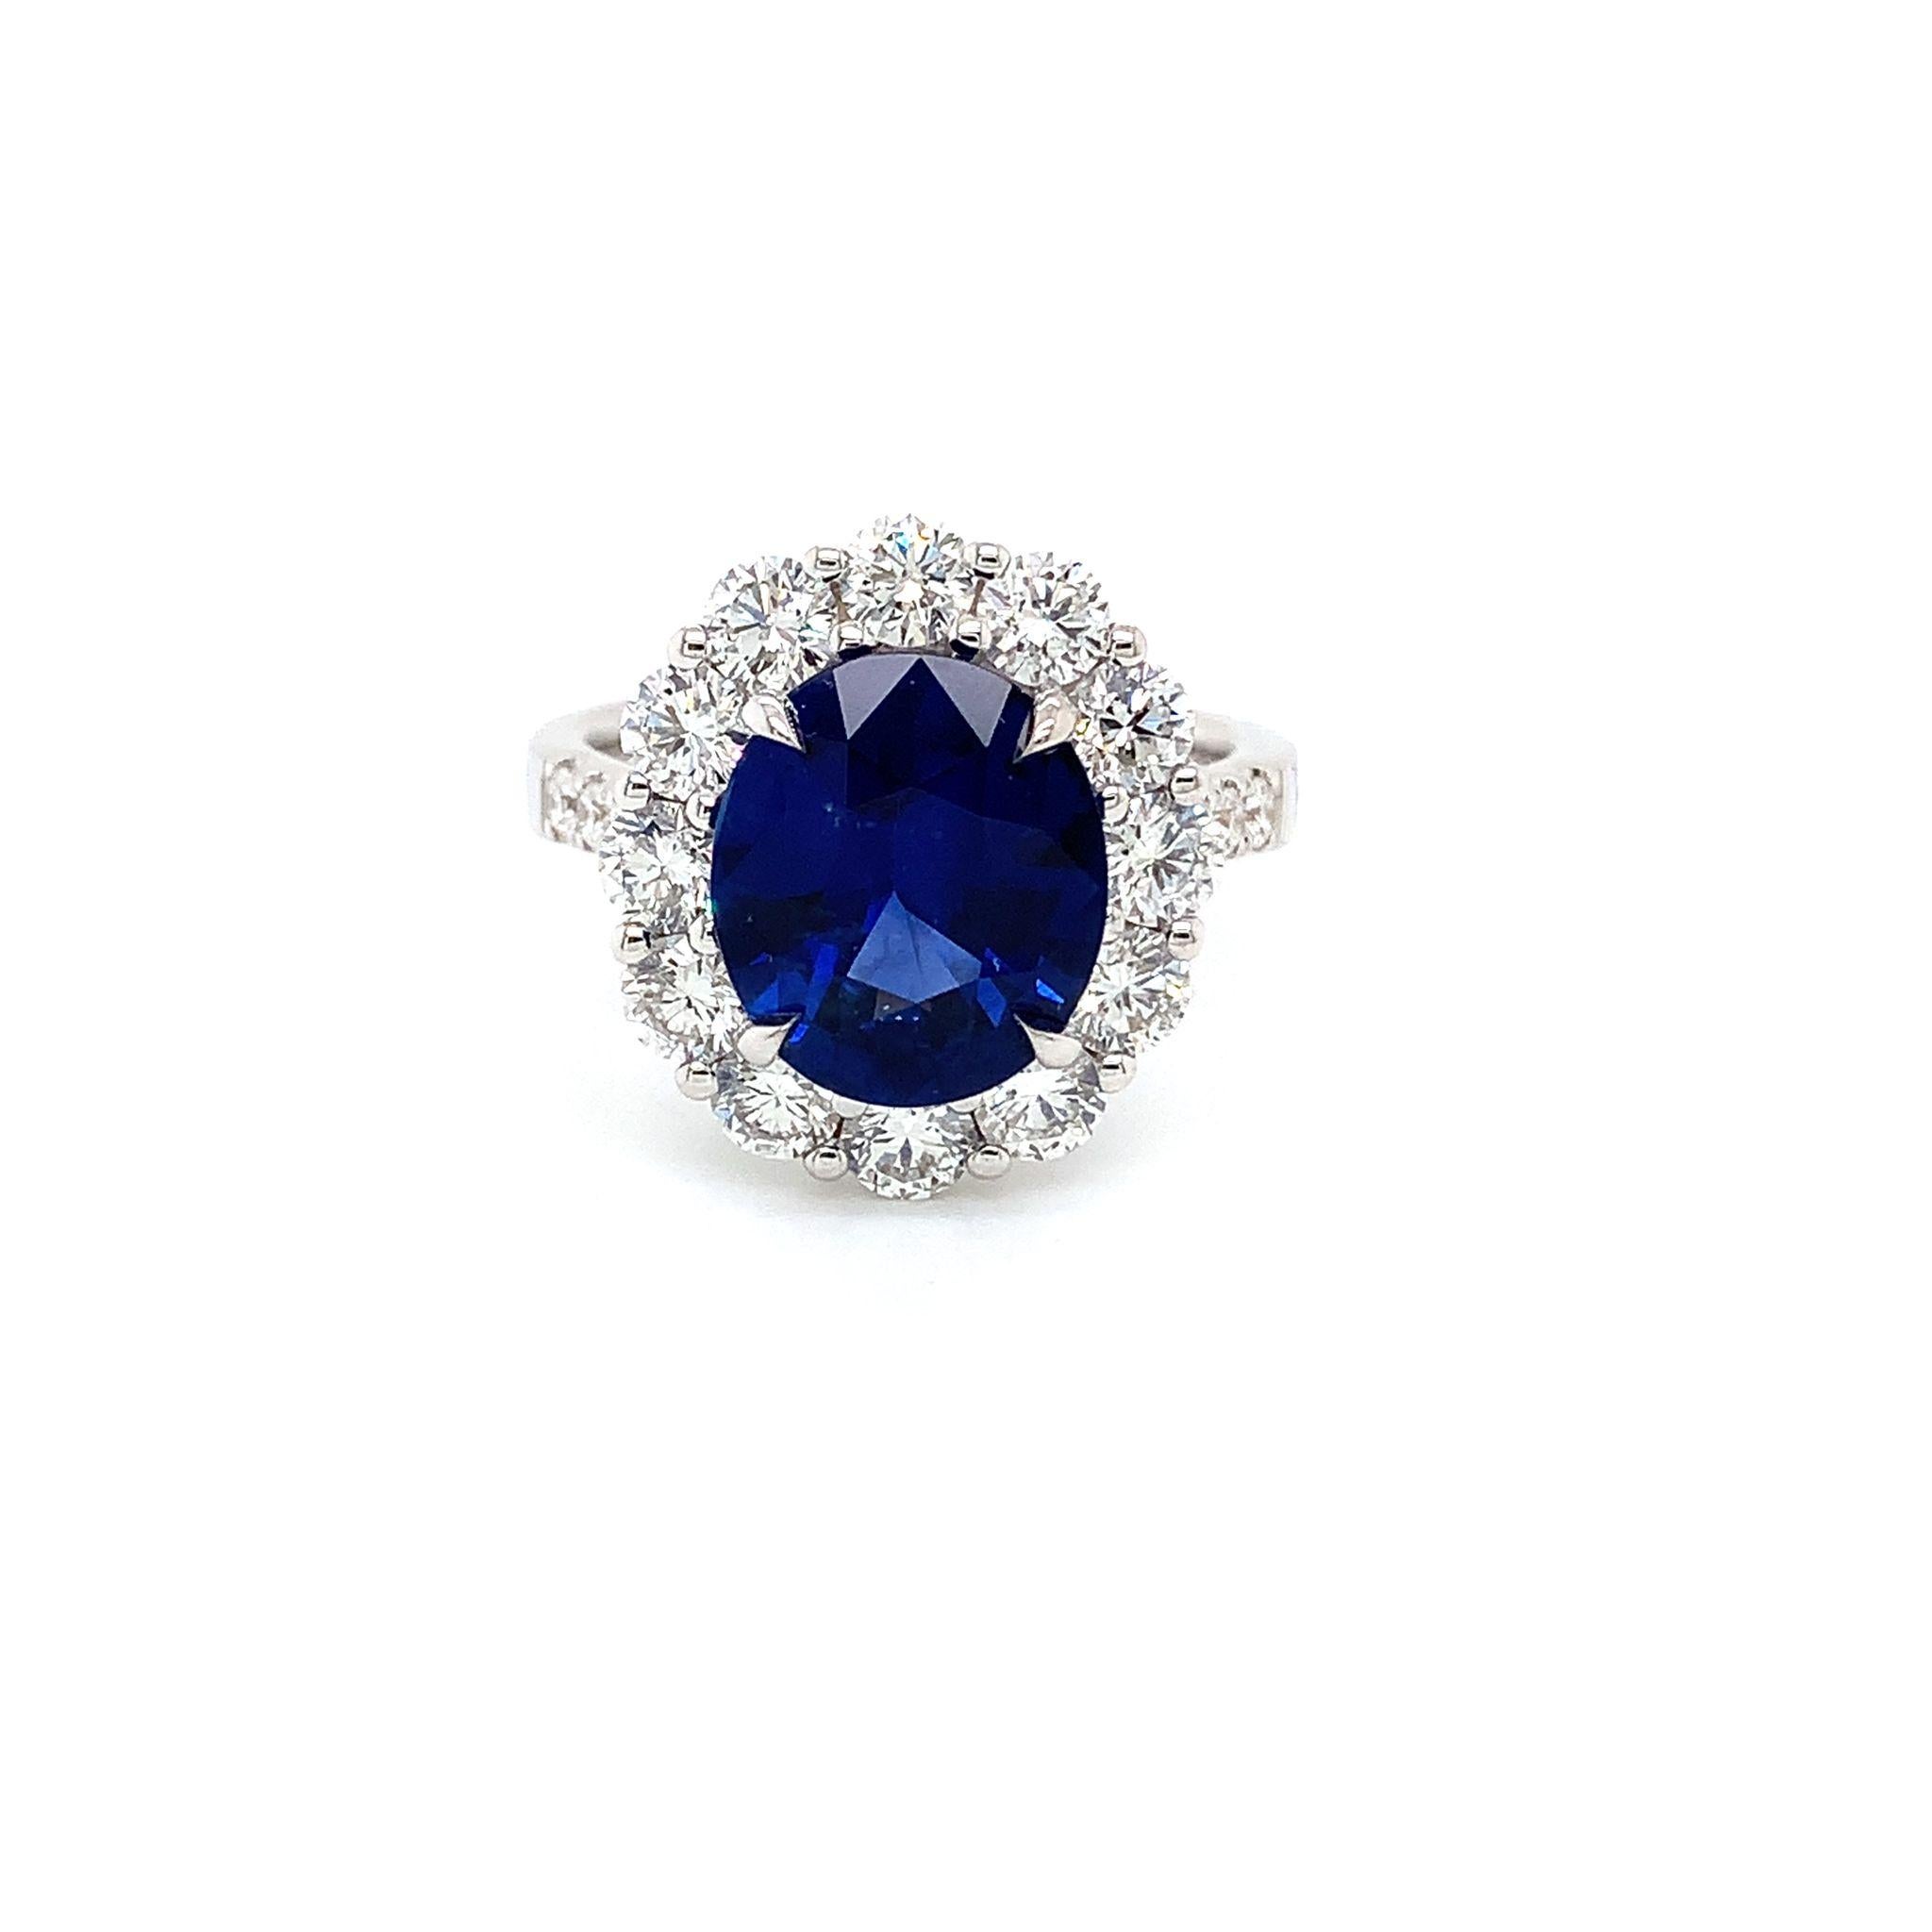 Oval Ceylon Sapphire weighing 4.12 cts.
Measuring (11.0x9.5) mm
12 round diamonds weighing 1.58 cts.
8 round diamonds on the shank weighing .16 cts
Set in 18K white gold ring
5.75 grams 